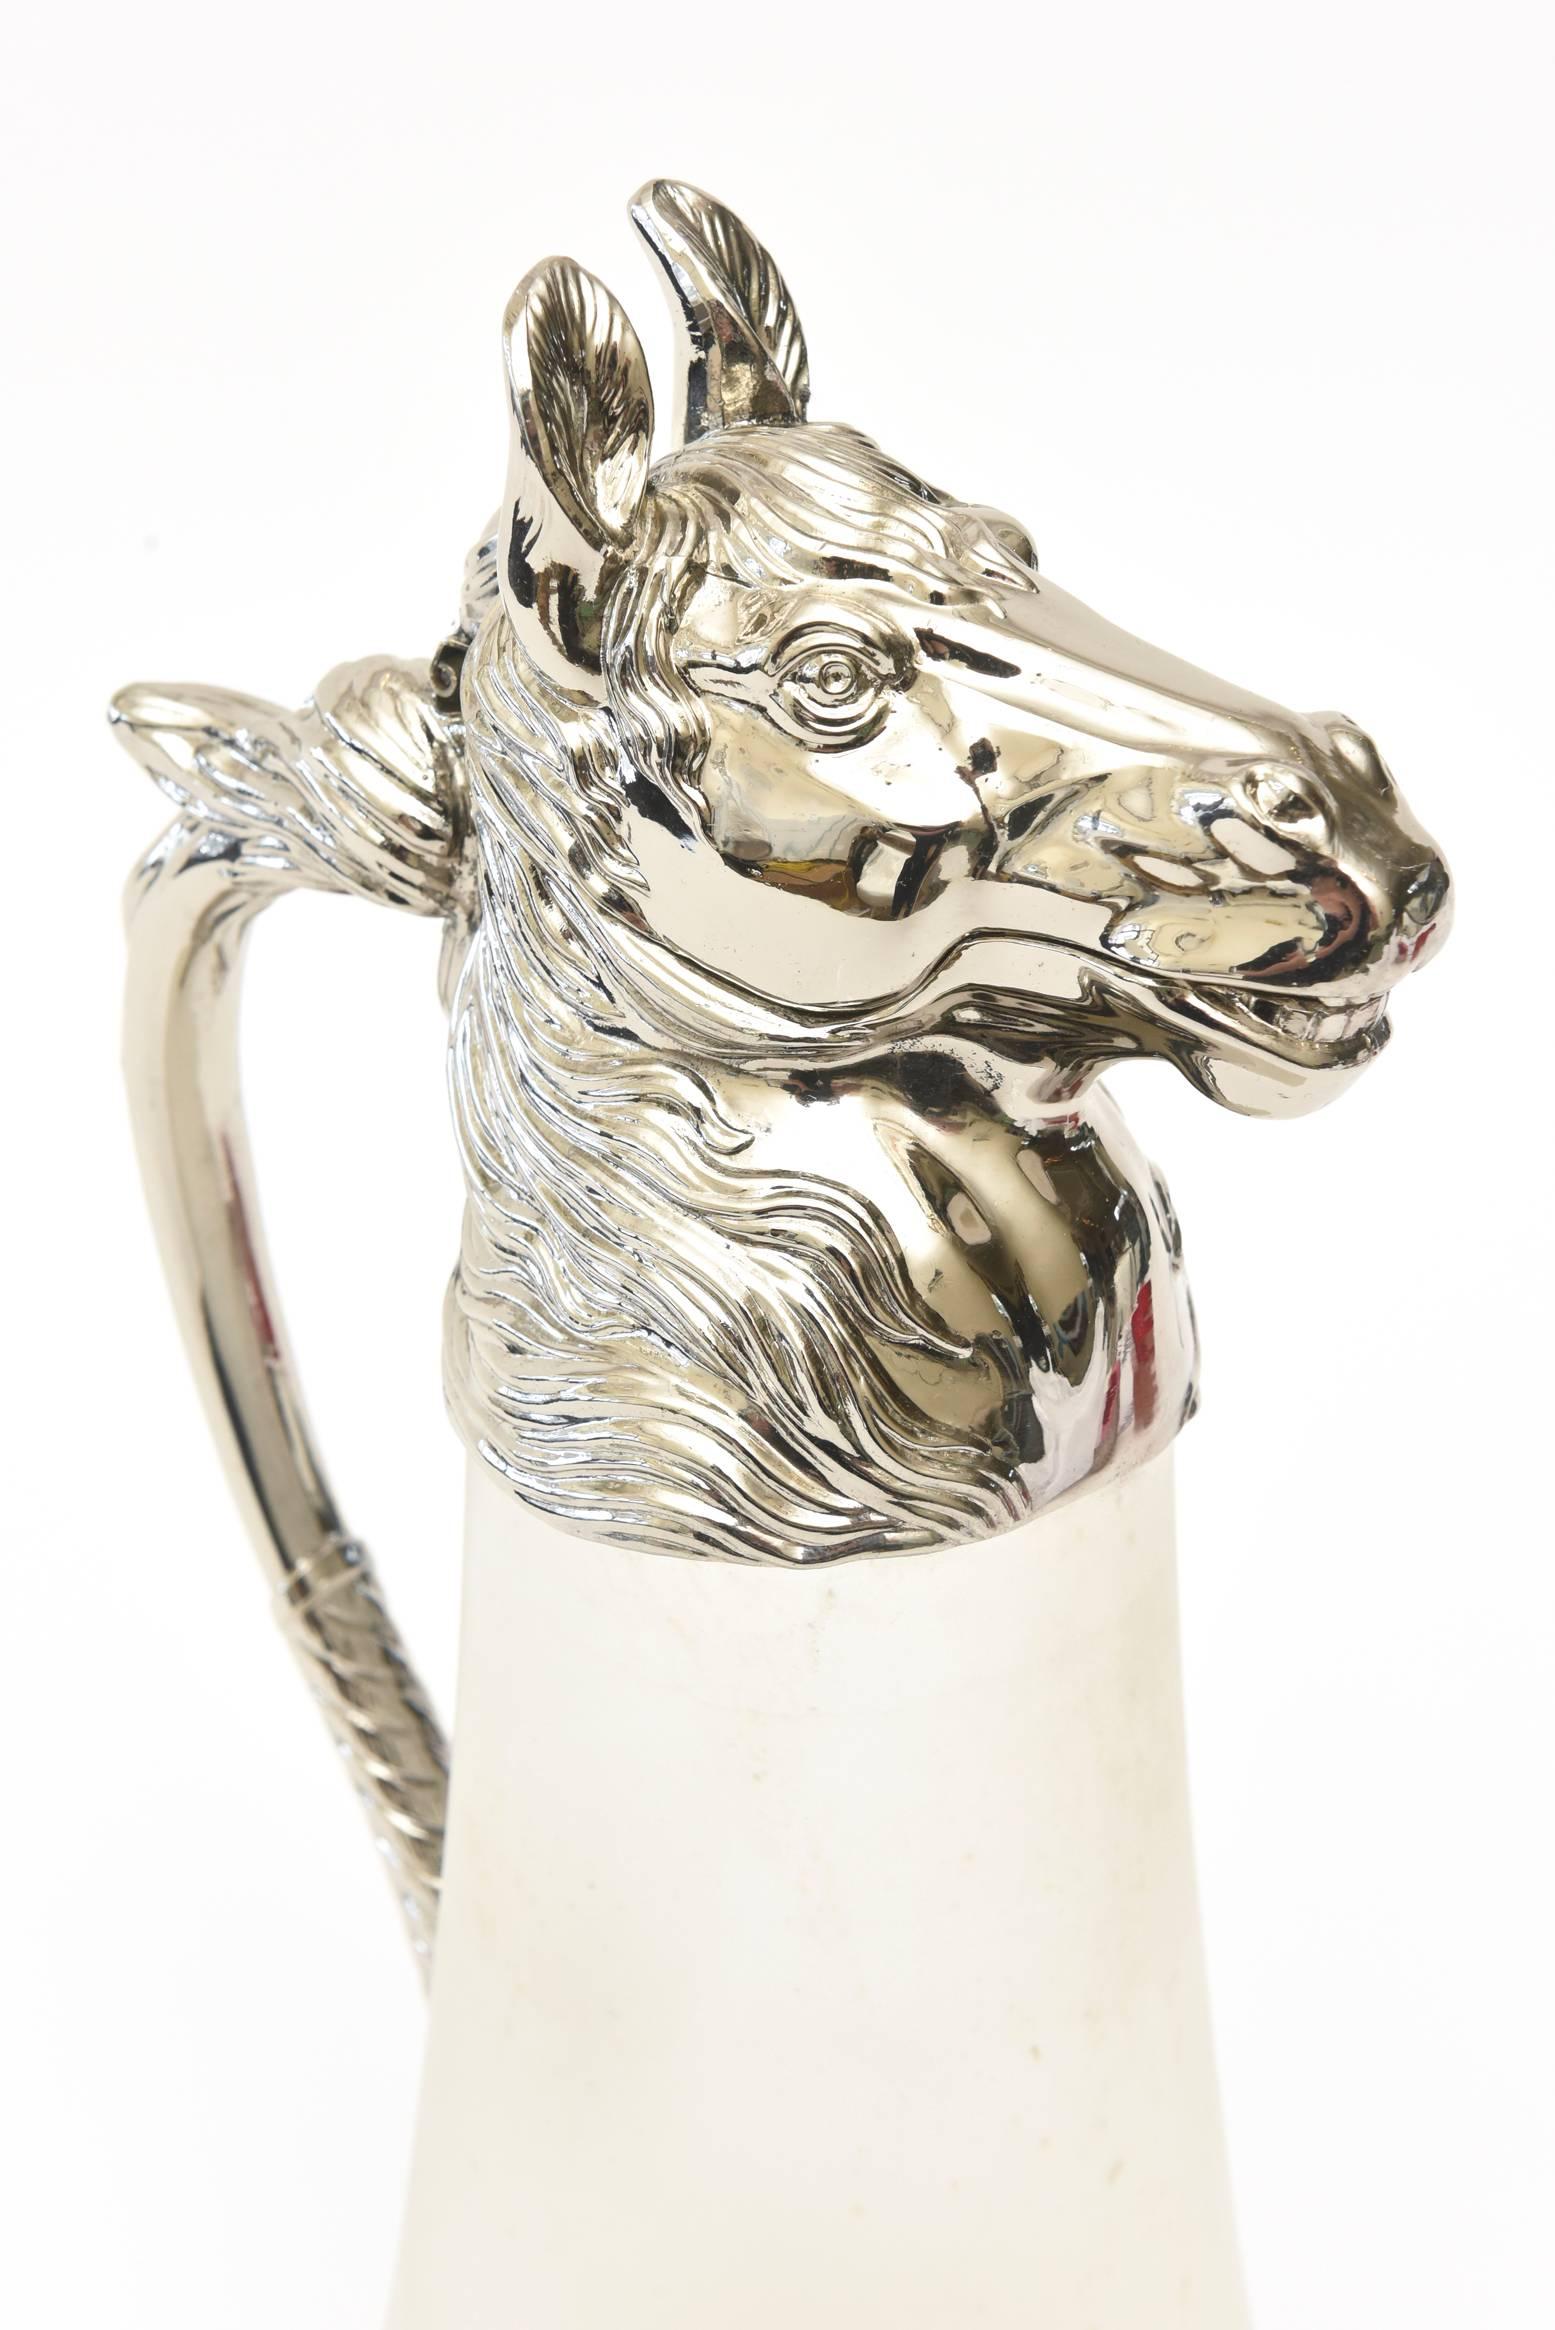 Organique Nickel-Plated and Frosted Glass Horse Decanter Pitcher Barware Vintage en vente